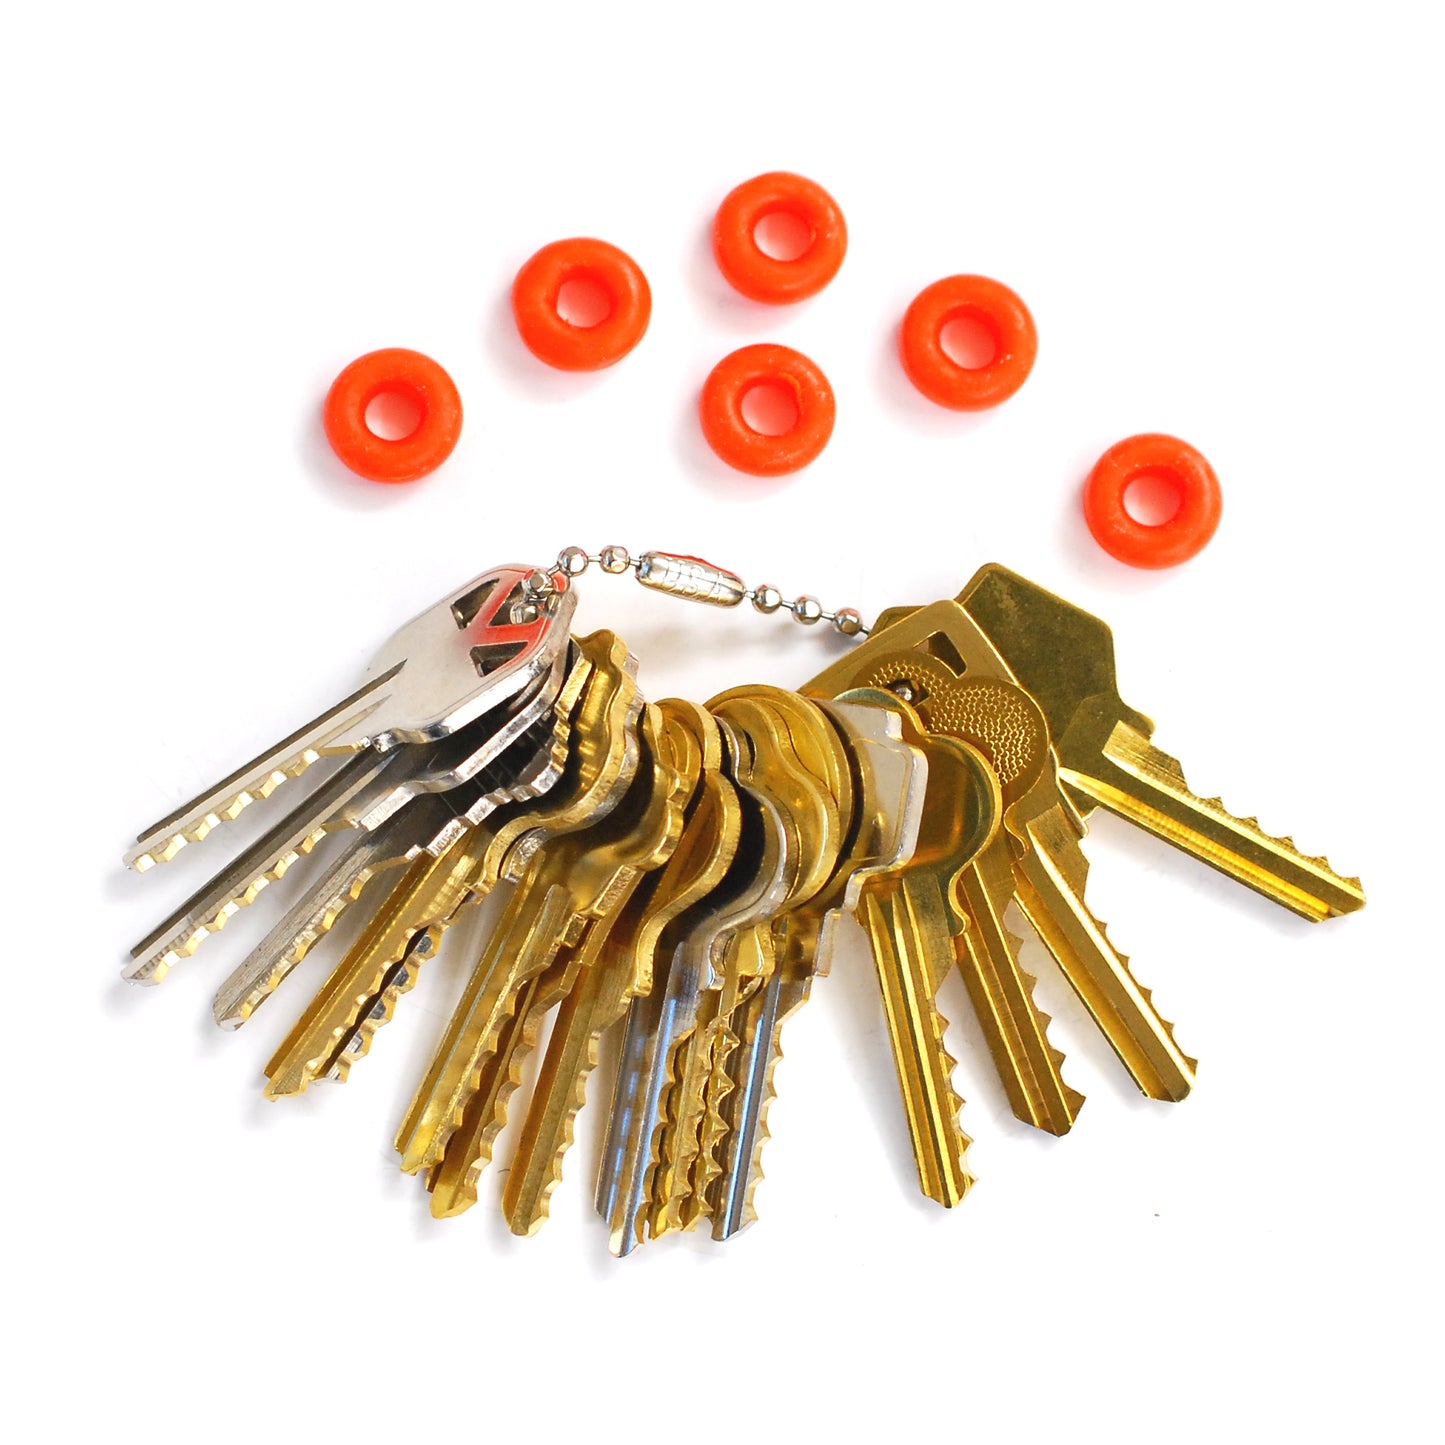 64 Residential, Padlock, Commercial, Mailbox, Cabinet, RV Key Collection Set